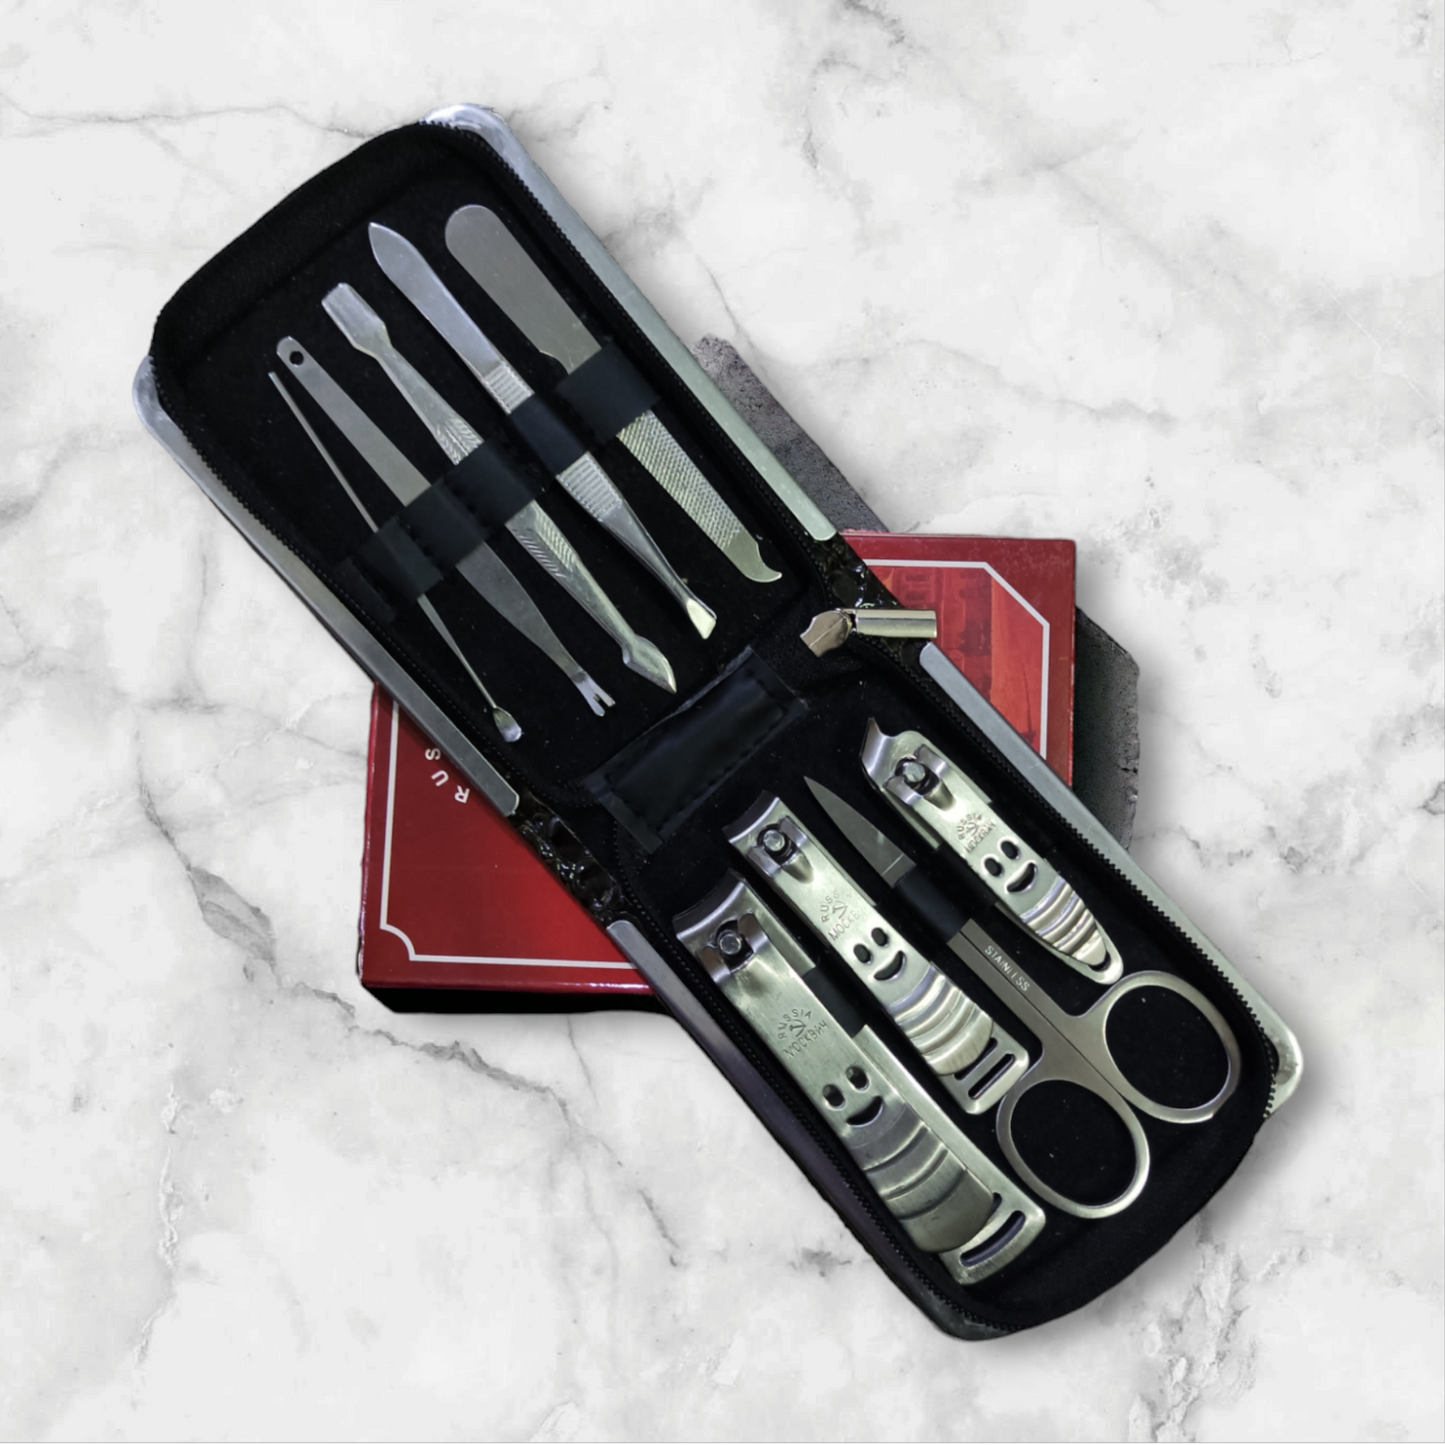 9 Pc's Manicure Tool Set Stainless Steel